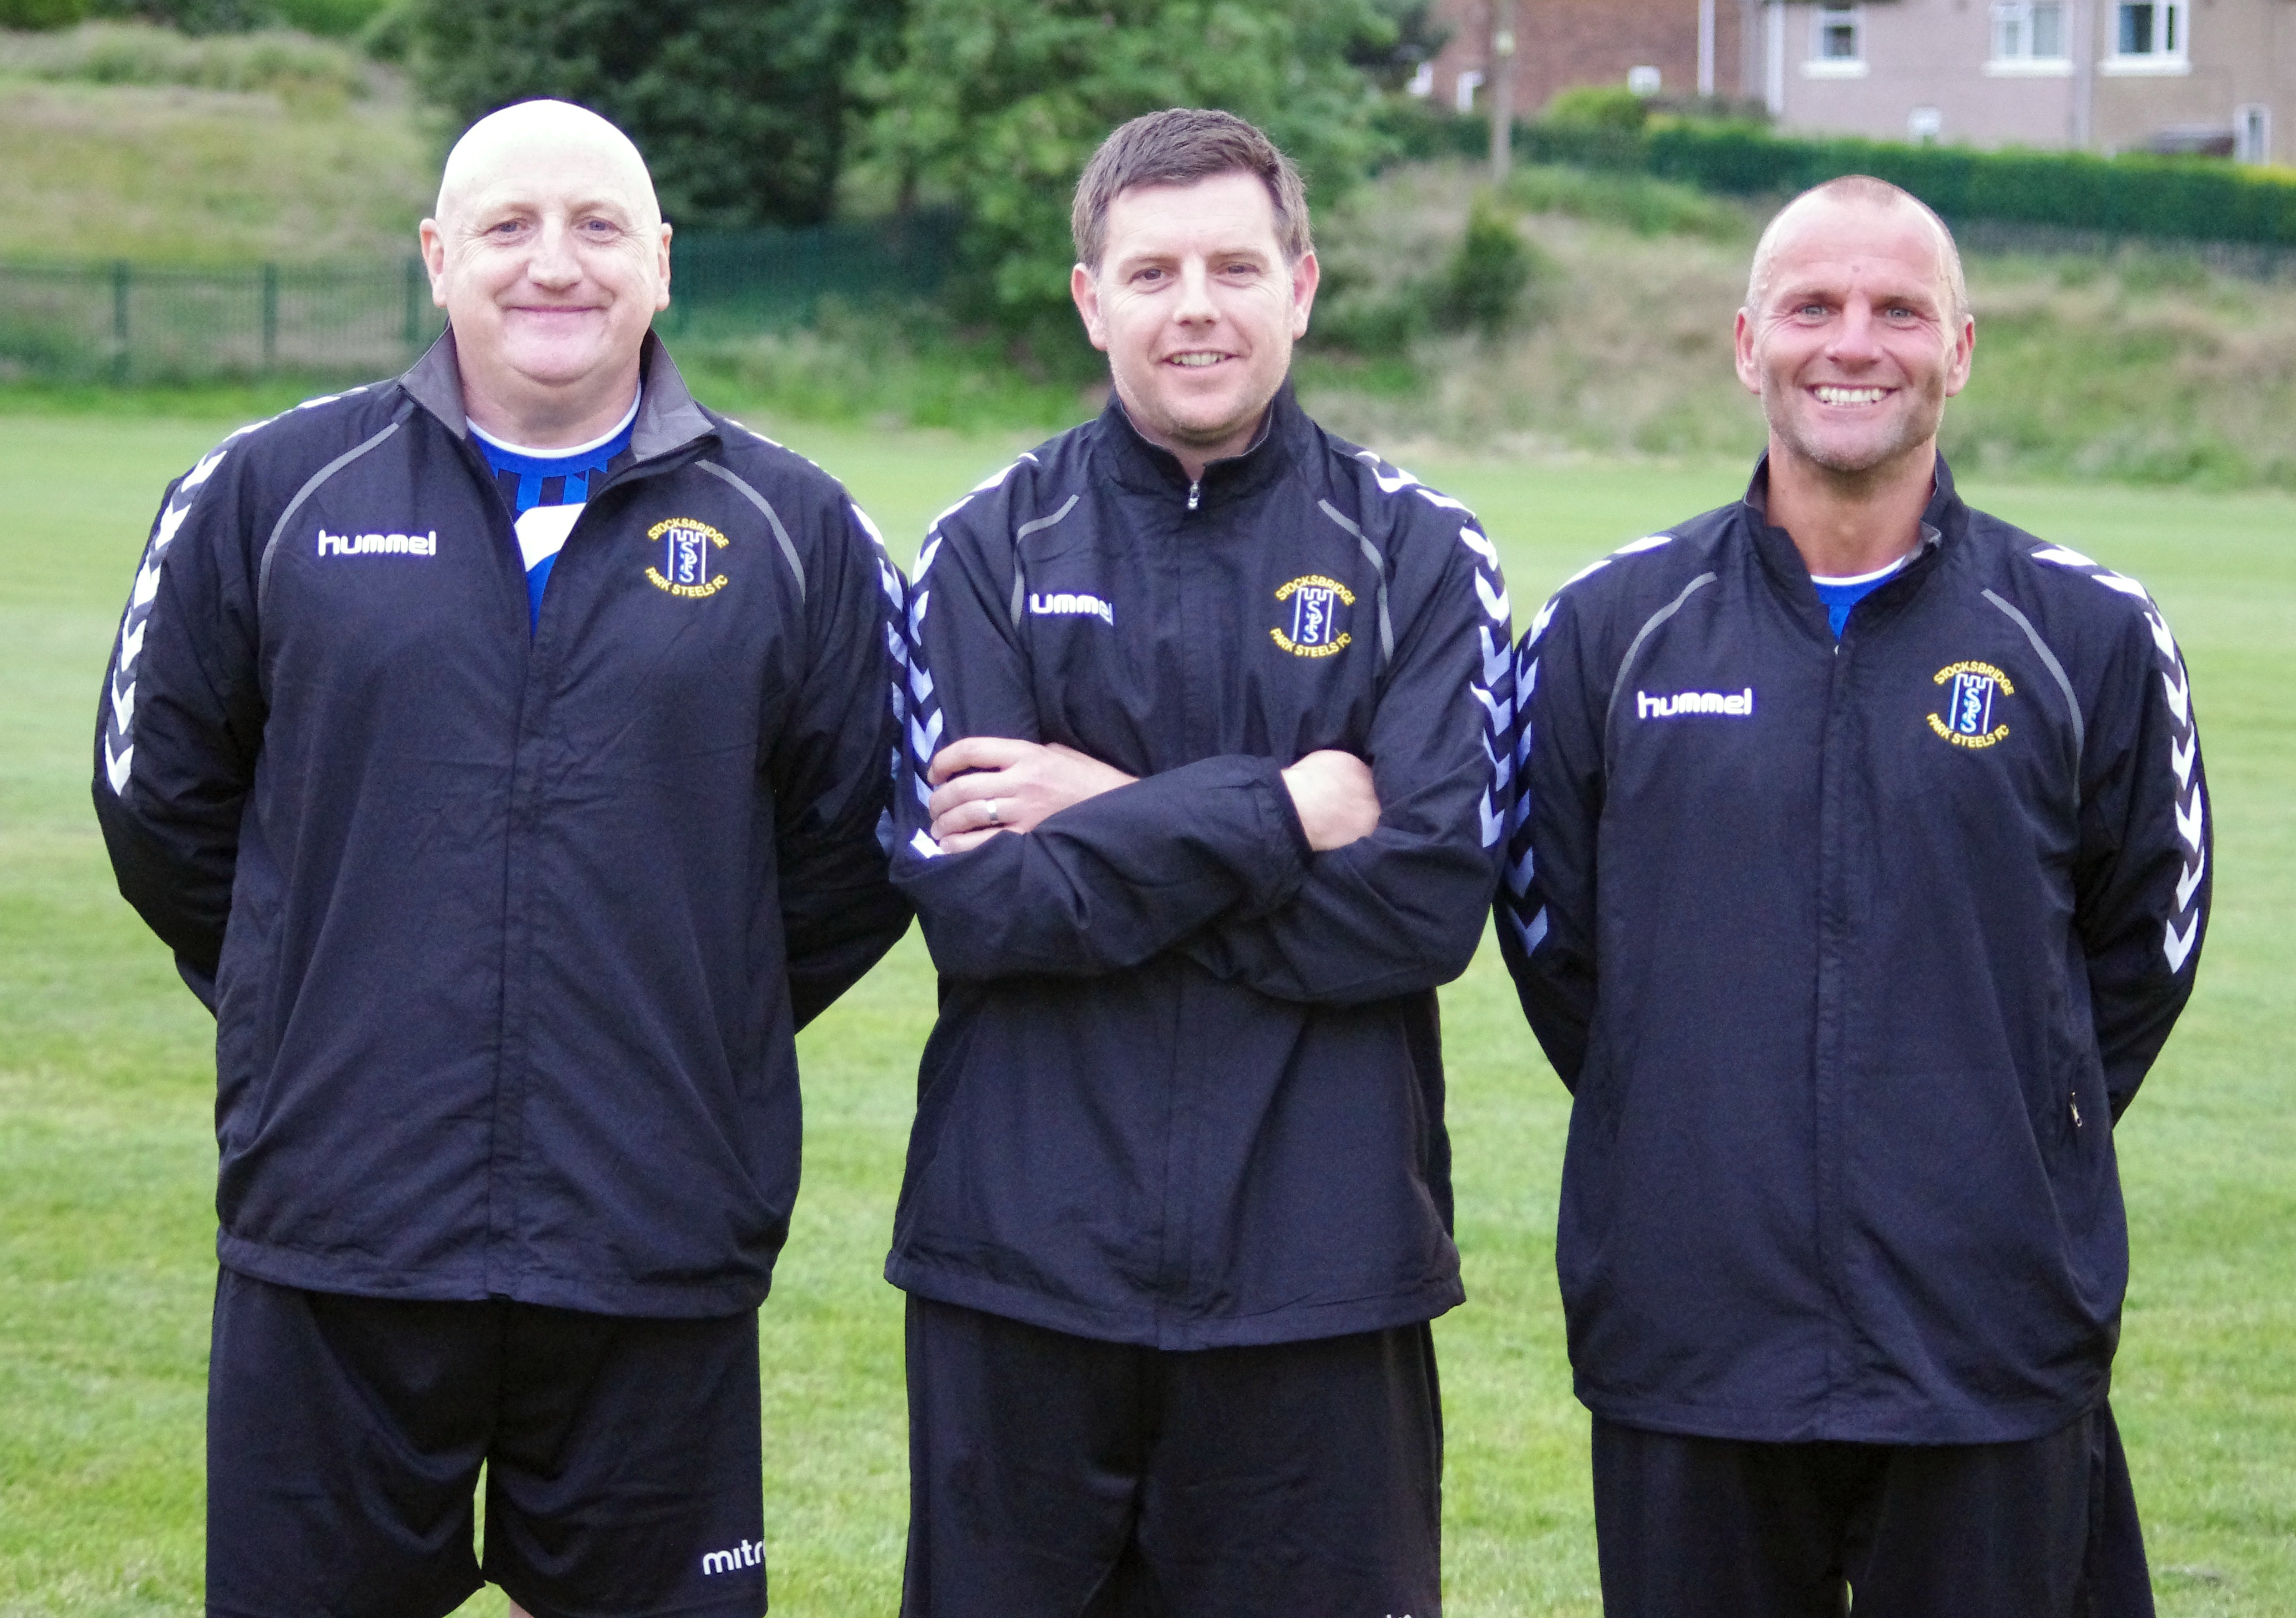 The Three Musketeers: physio Shaun Handisides, manager Chris Hilton and assistant Mark 'Willy' Wilson